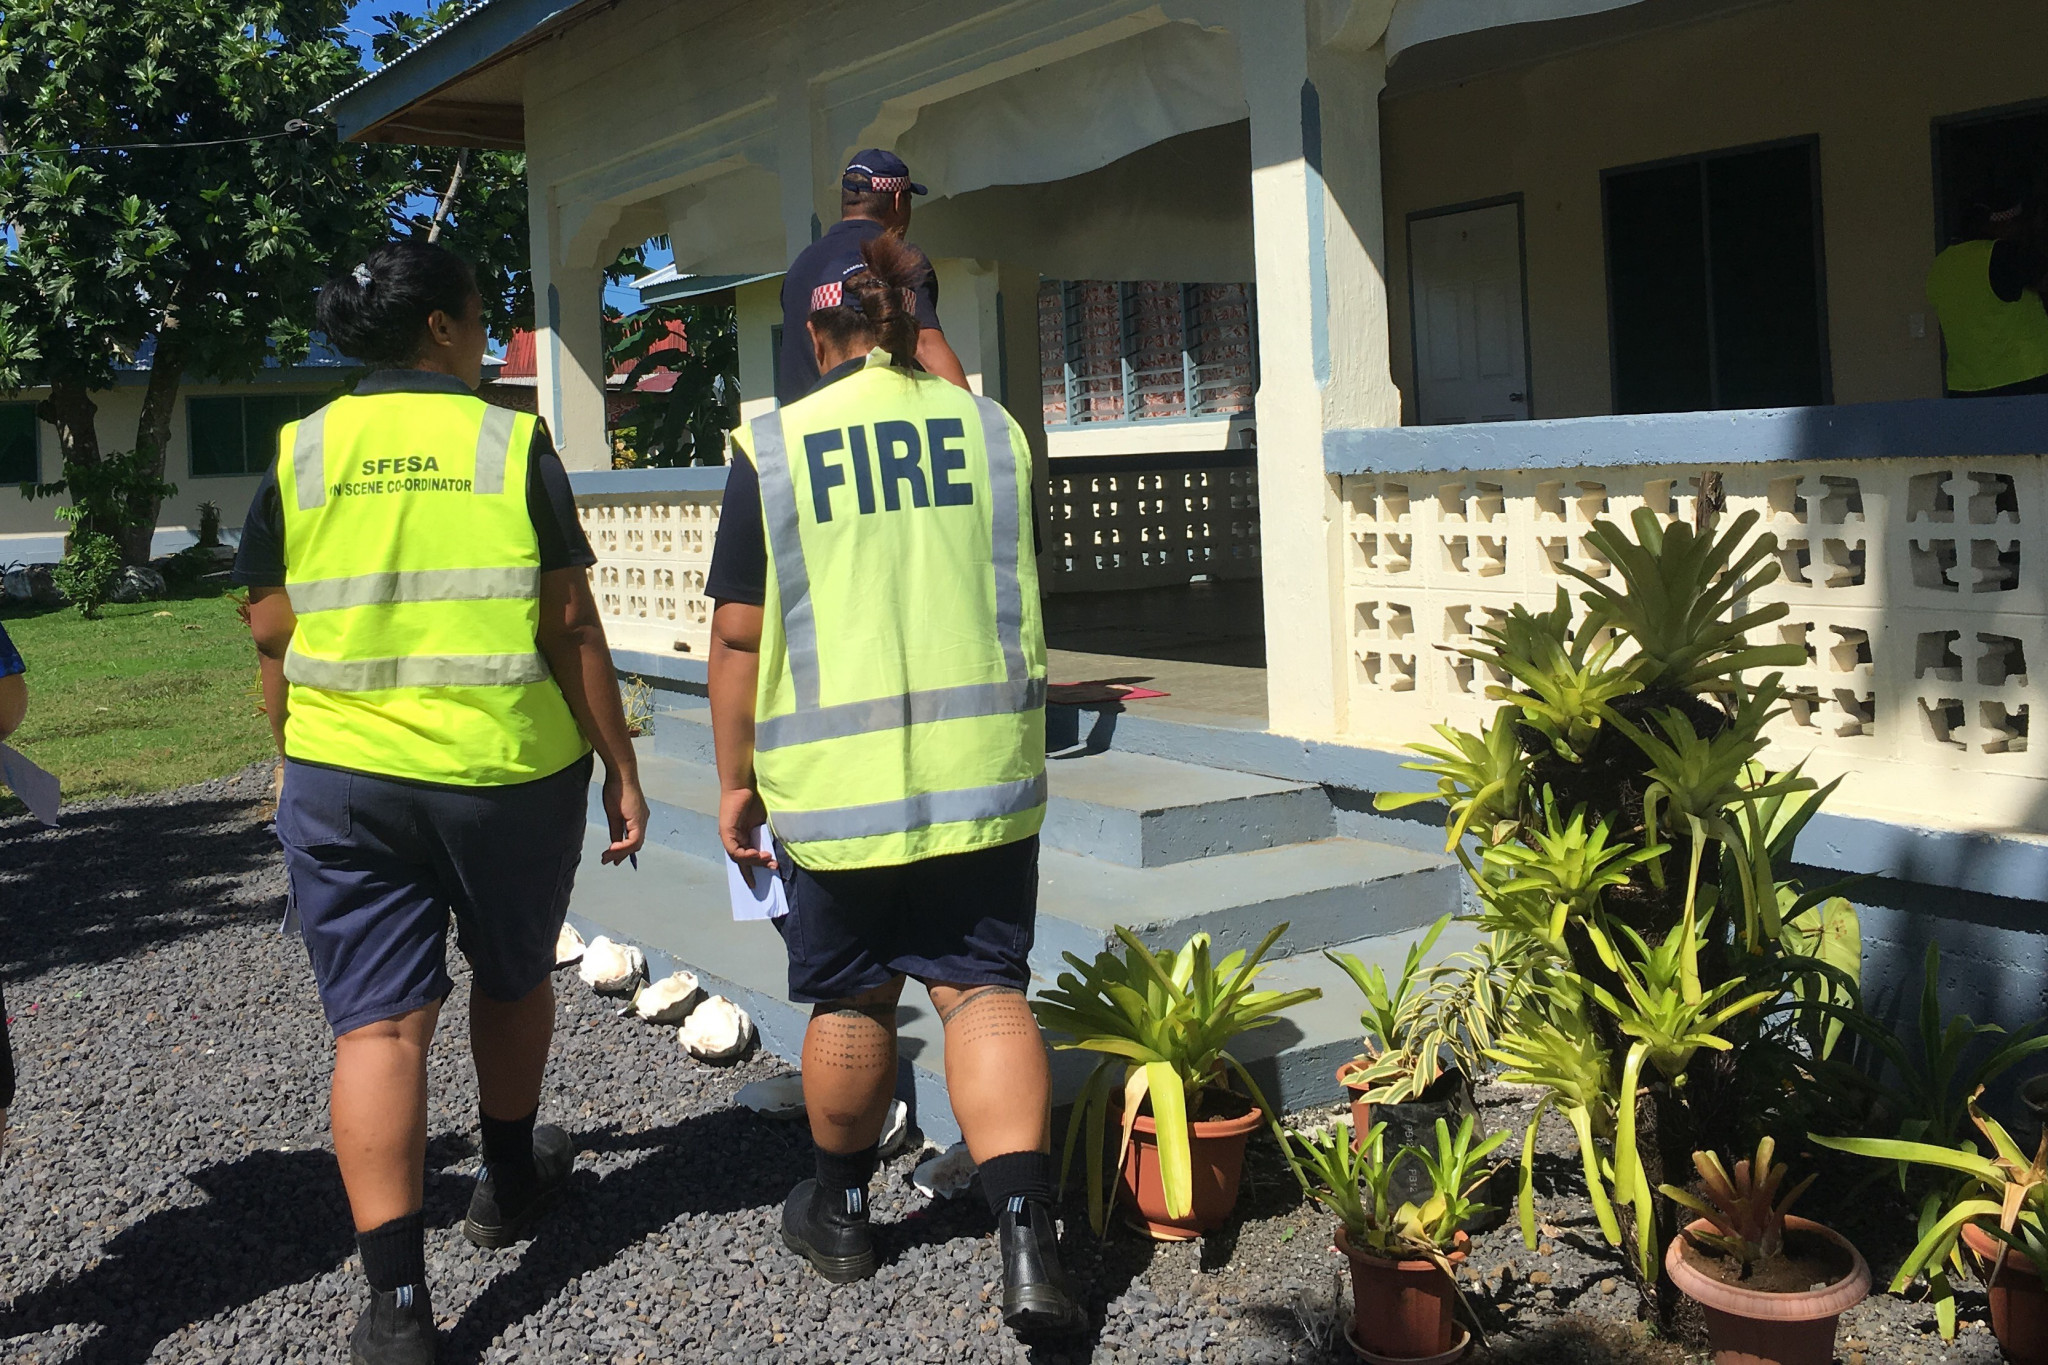 Inspections have been taking place to ensure safety ©Samoa 2019